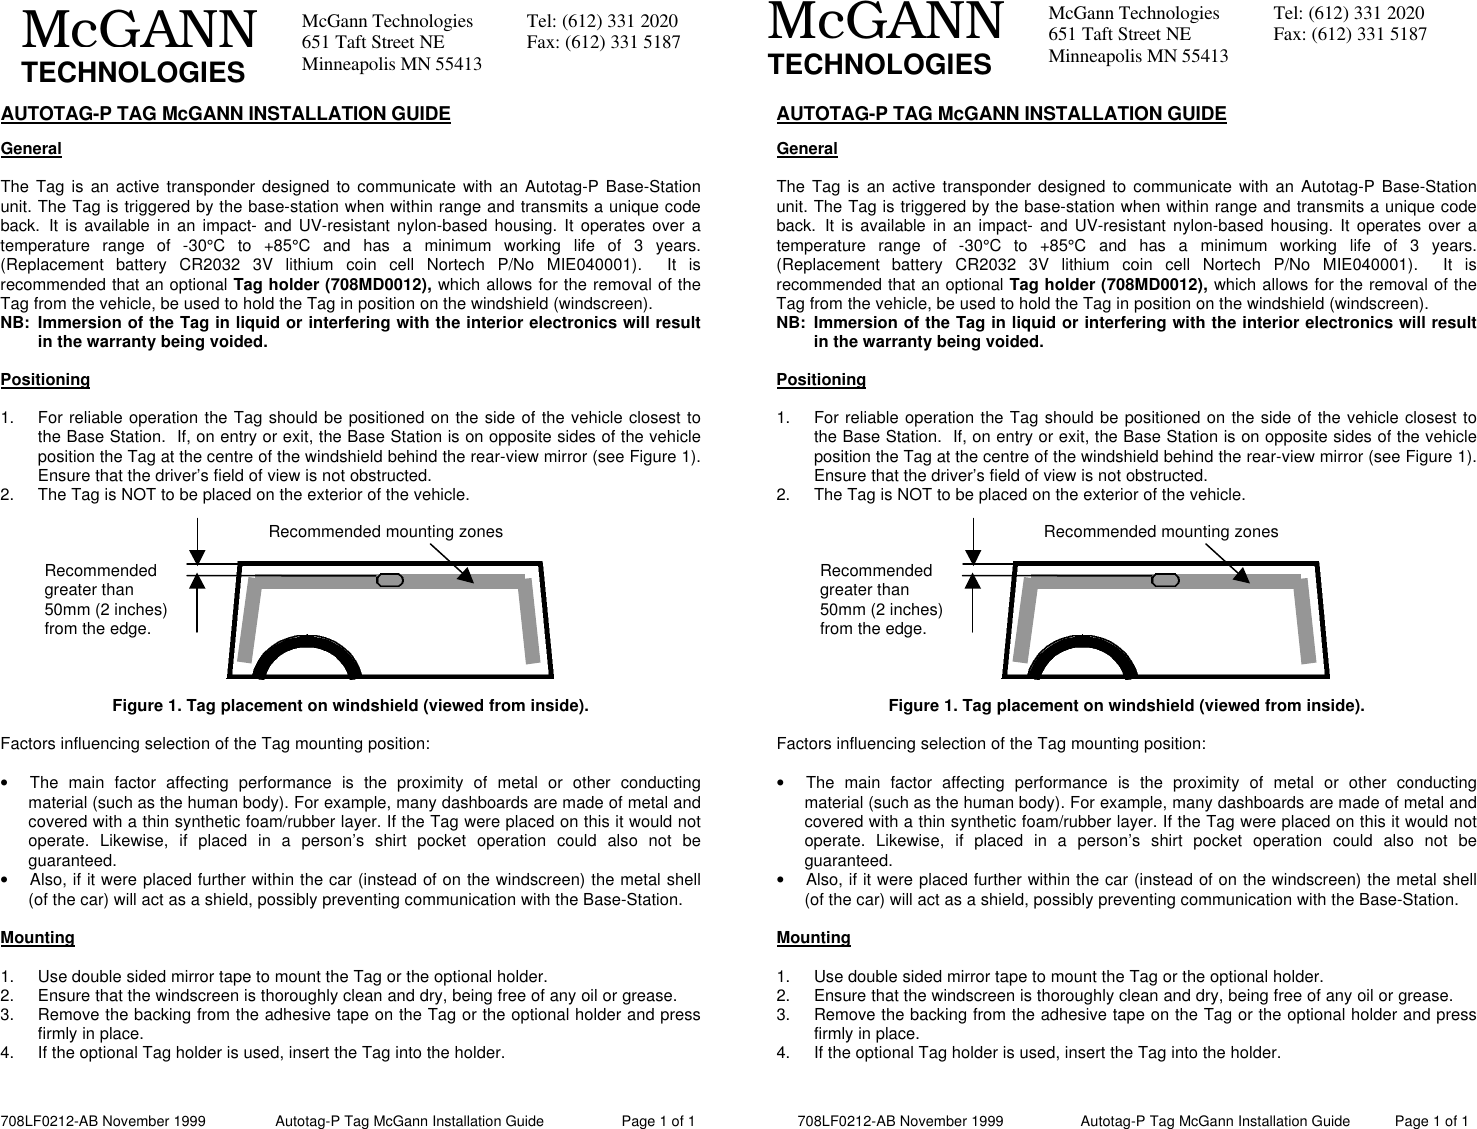 708LF0212-AB November 1999                 Autotag-P Tag McGann Installation Guide                   Page 1 of 1            708LF0212-AB November 1999                   Autotag-P Tag McGann Installation Guide           Page 1 of 1McGann Technologies Tel: (612) 331 2020651 Taft Street NE Fax: (612) 331 5187Minneapolis MN 55413McGANNTECHNOLOGIESMcGann Technologies Tel: (612) 331 2020651 Taft Street NE Fax: (612) 331 5187Minneapolis MN 55413McGANNTECHNOLOGIESAUTOTAG-P TAG McGANN INSTALLATION GUIDEGeneralThe Tag is an active transponder designed to communicate with an Autotag-P Base-Stationunit. The Tag is triggered by the base-station when within range and transmits a unique codeback. It is available in an impact- and UV-resistant nylon-based housing. It operates over atemperature range of -30°C to +85°C and has a minimum working life of 3 years.(Replacement battery CR2032 3V lithium coin cell Nortech P/No MIE040001).  It isrecommended that an optional Tag holder (708MD0012), which allows for the removal of theTag from the vehicle, be used to hold the Tag in position on the windshield (windscreen).NB: Immersion of the Tag in liquid or interfering with the interior electronics will resultin the warranty being voided.Positioning1. For reliable operation the Tag should be positioned on the side of the vehicle closest tothe Base Station.  If, on entry or exit, the Base Station is on opposite sides of the vehicleposition the Tag at the centre of the windshield behind the rear-view mirror (see Figure 1).Ensure that the driver’s field of view is not obstructed.2. The Tag is NOT to be placed on the exterior of the vehicle.Figure 1. Tag placement on windshield (viewed from inside).Factors influencing selection of the Tag mounting position:• The main factor affecting performance is the proximity of metal or other conductingmaterial (such as the human body). For example, many dashboards are made of metal andcovered with a thin synthetic foam/rubber layer. If the Tag were placed on this it would notoperate. Likewise, if placed in a person’s shirt pocket operation could also not beguaranteed.• Also, if it were placed further within the car (instead of on the windscreen) the metal shell(of the car) will act as a shield, possibly preventing communication with the Base-Station.Mounting1. Use double sided mirror tape to mount the Tag or the optional holder.2. Ensure that the windscreen is thoroughly clean and dry, being free of any oil or grease.3. Remove the backing from the adhesive tape on the Tag or the optional holder and pressfirmly in place.4. If the optional Tag holder is used, insert the Tag into the holder.AUTOTAG-P TAG McGANN INSTALLATION GUIDEGeneralThe Tag is an active transponder designed to communicate with an Autotag-P Base-Stationunit. The Tag is triggered by the base-station when within range and transmits a unique codeback. It is available in an impact- and UV-resistant nylon-based housing. It operates over atemperature range of -30°C to +85°C and has a minimum working life of 3 years.(Replacement battery CR2032 3V lithium coin cell Nortech P/No MIE040001).  It isrecommended that an optional Tag holder (708MD0012), which allows for the removal of theTag from the vehicle, be used to hold the Tag in position on the windshield (windscreen).NB: Immersion of the Tag in liquid or interfering with the interior electronics will resultin the warranty being voided.Positioning1. For reliable operation the Tag should be positioned on the side of the vehicle closest tothe Base Station.  If, on entry or exit, the Base Station is on opposite sides of the vehicleposition the Tag at the centre of the windshield behind the rear-view mirror (see Figure 1).Ensure that the driver’s field of view is not obstructed.2. The Tag is NOT to be placed on the exterior of the vehicle.Figure 1. Tag placement on windshield (viewed from inside).Factors influencing selection of the Tag mounting position:• The main factor affecting performance is the proximity of metal or other conductingmaterial (such as the human body). For example, many dashboards are made of metal andcovered with a thin synthetic foam/rubber layer. If the Tag were placed on this it would notoperate. Likewise, if placed in a person’s shirt pocket operation could also not beguaranteed.• Also, if it were placed further within the car (instead of on the windscreen) the metal shell(of the car) will act as a shield, possibly preventing communication with the Base-Station.Mounting1. Use double sided mirror tape to mount the Tag or the optional holder.2. Ensure that the windscreen is thoroughly clean and dry, being free of any oil or grease.3. Remove the backing from the adhesive tape on the Tag or the optional holder and pressfirmly in place.4. If the optional Tag holder is used, insert the Tag into the holder.Recommendedgreater than50mm (2 inches)from the edge.Recommended mounting zonesRecommendedgreater than50mm (2 inches)from the edge.Recommended mounting zones